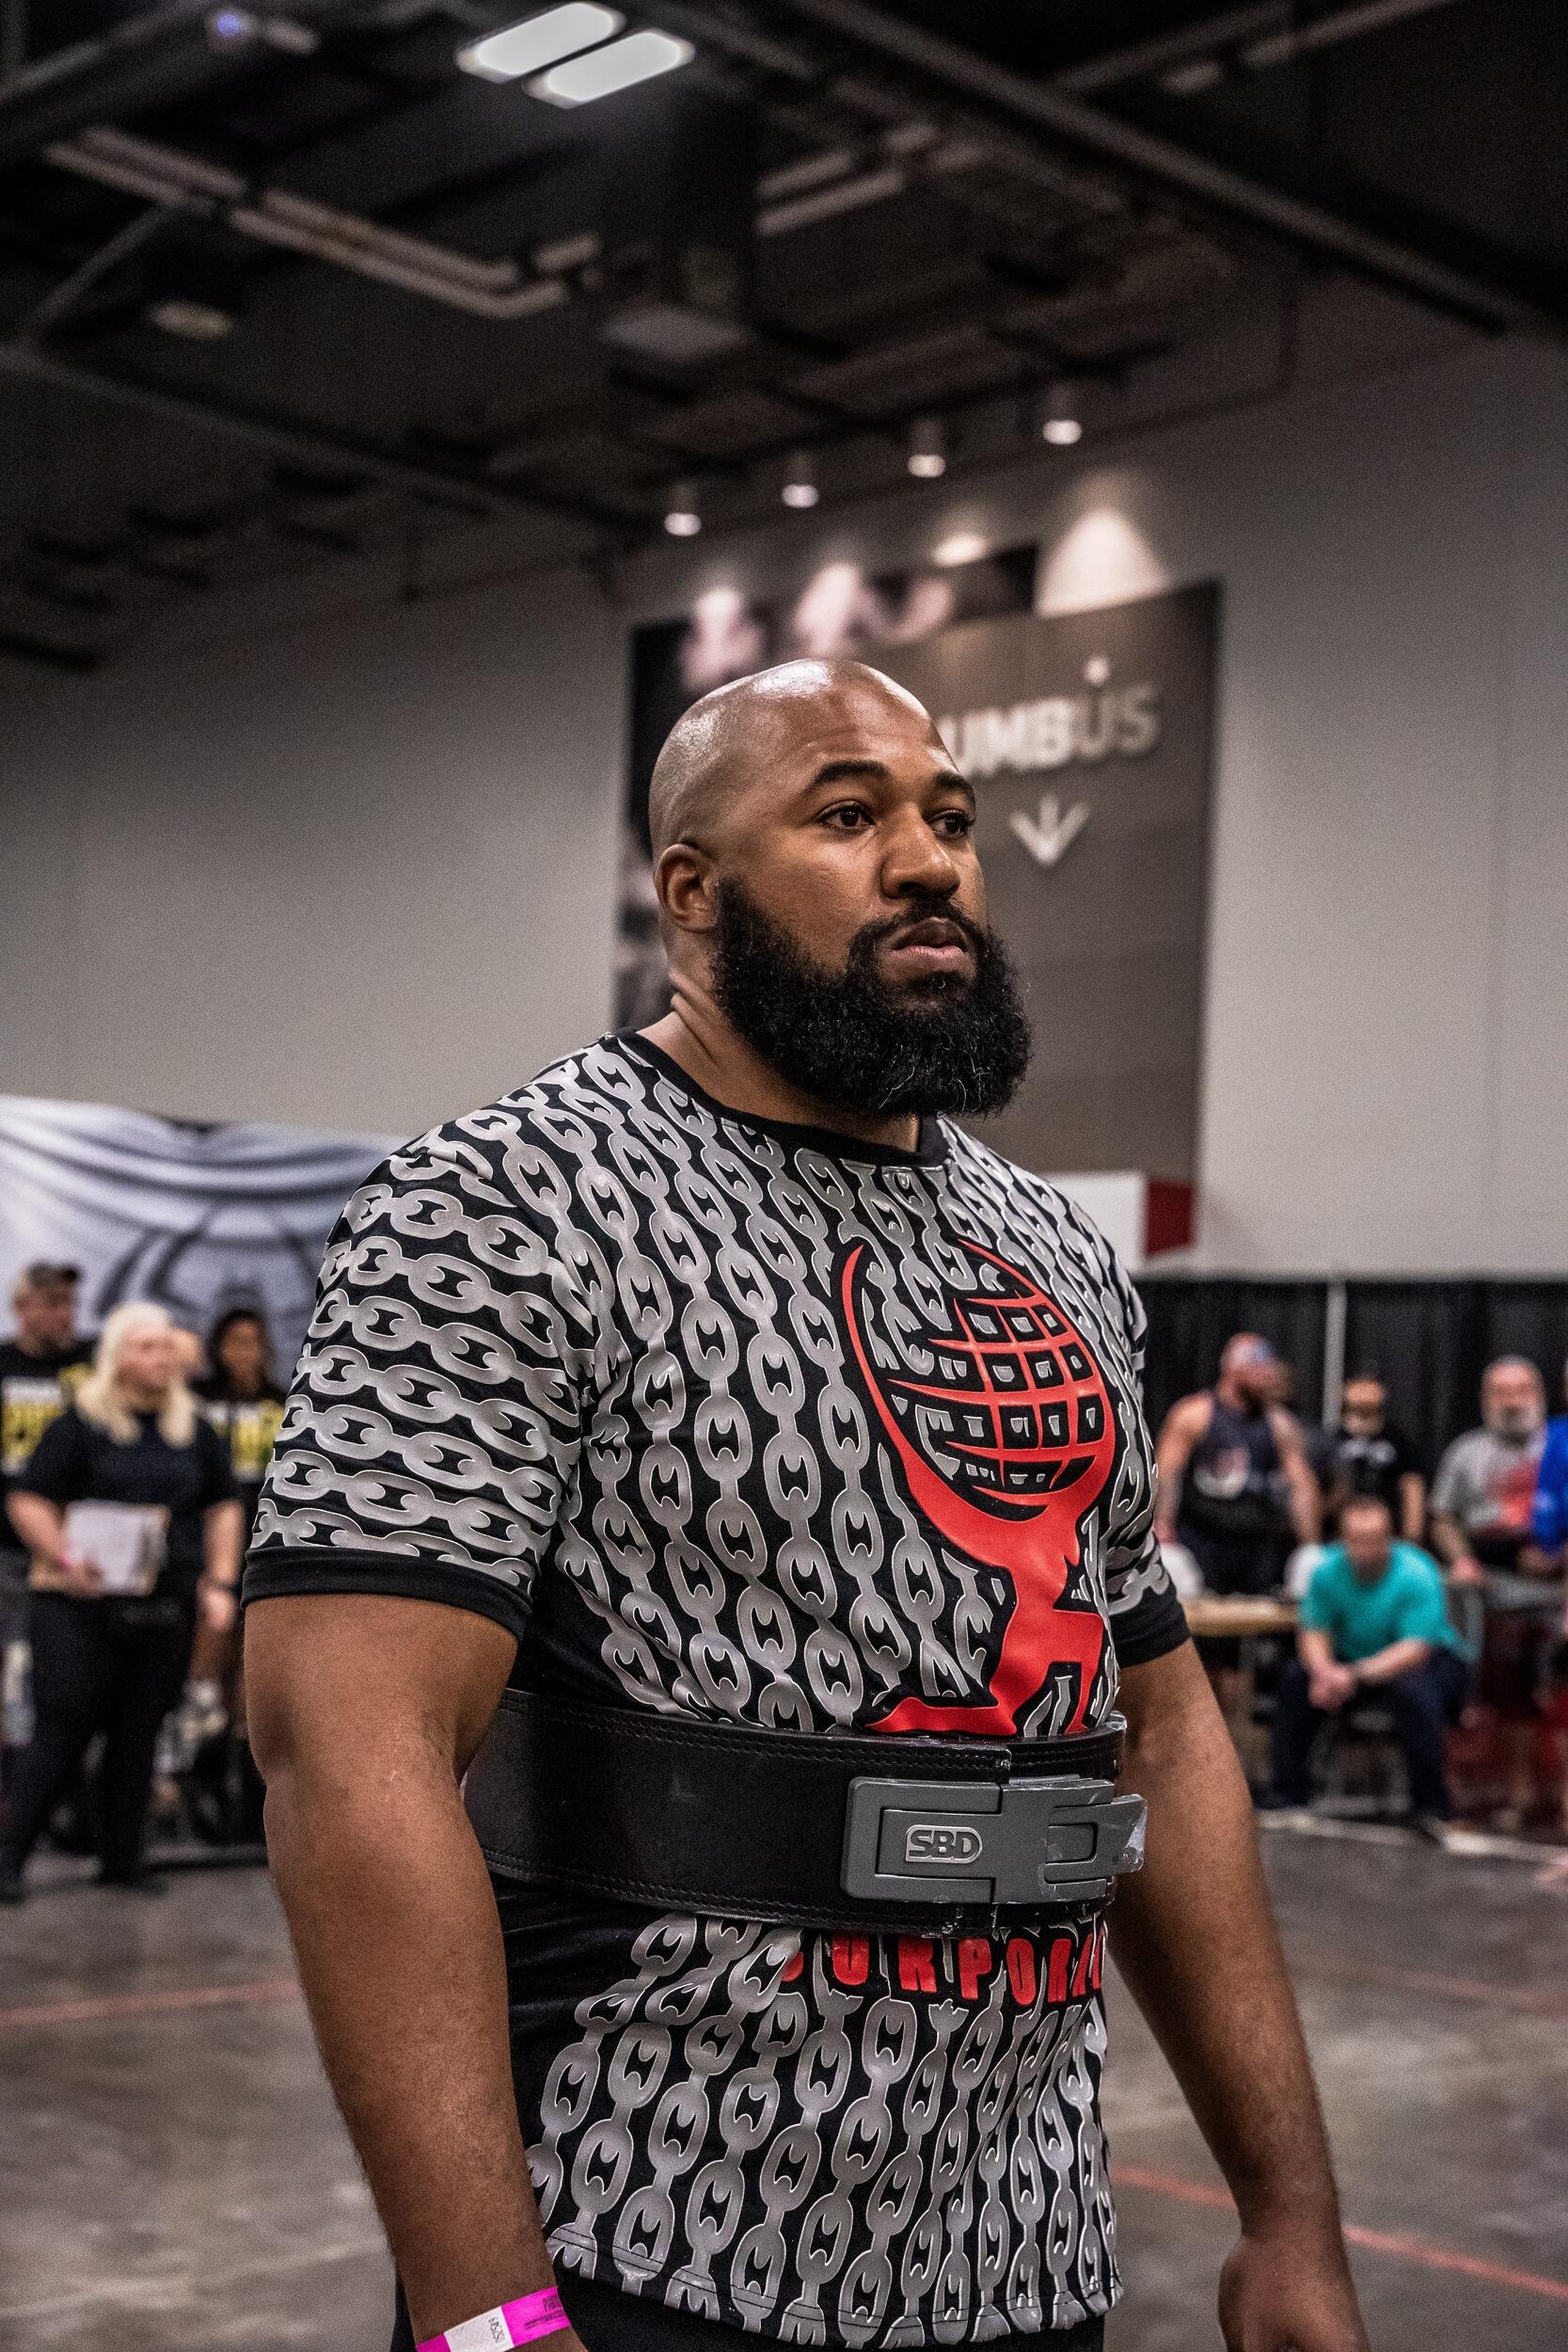 A photo of a man from the waist up wearing a t-shirt and a weight lifting belt. 